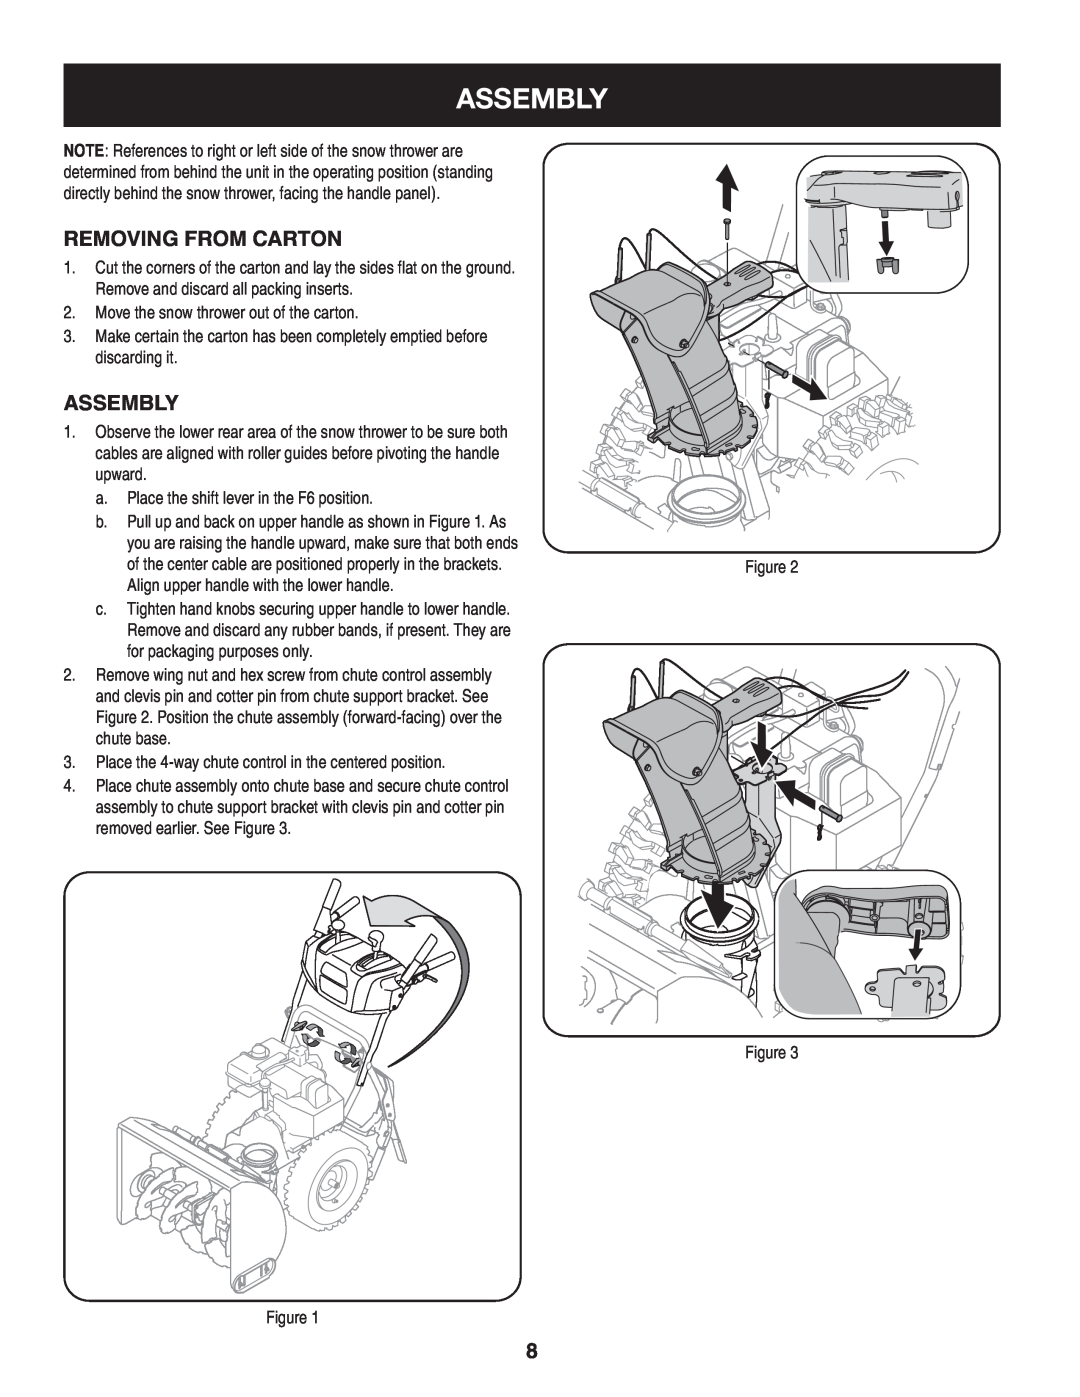 Sears 247.8879 operating instructions Assembly, Removing From Carton, assembly 